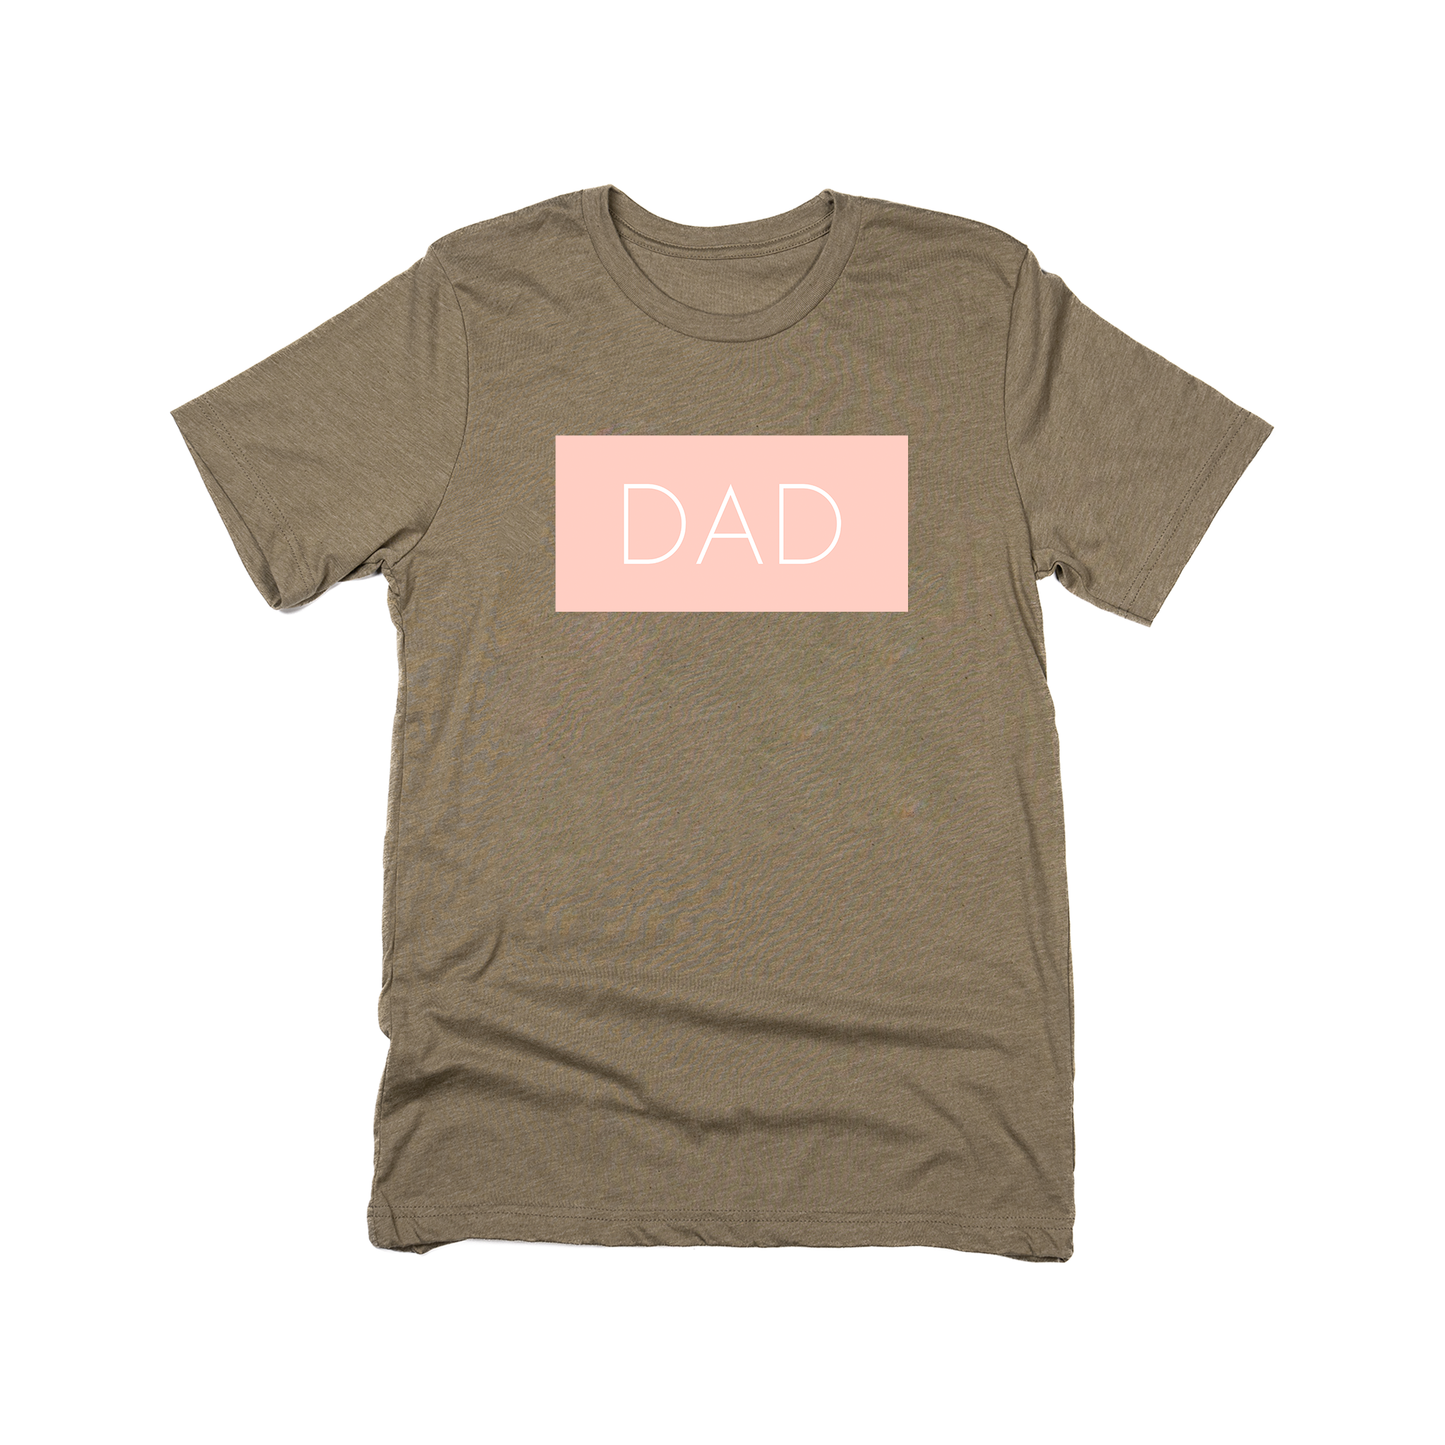 Dad (Boxed Collection, Ballerina Pink Box/White Text, Across Front) - Tee (Olive)